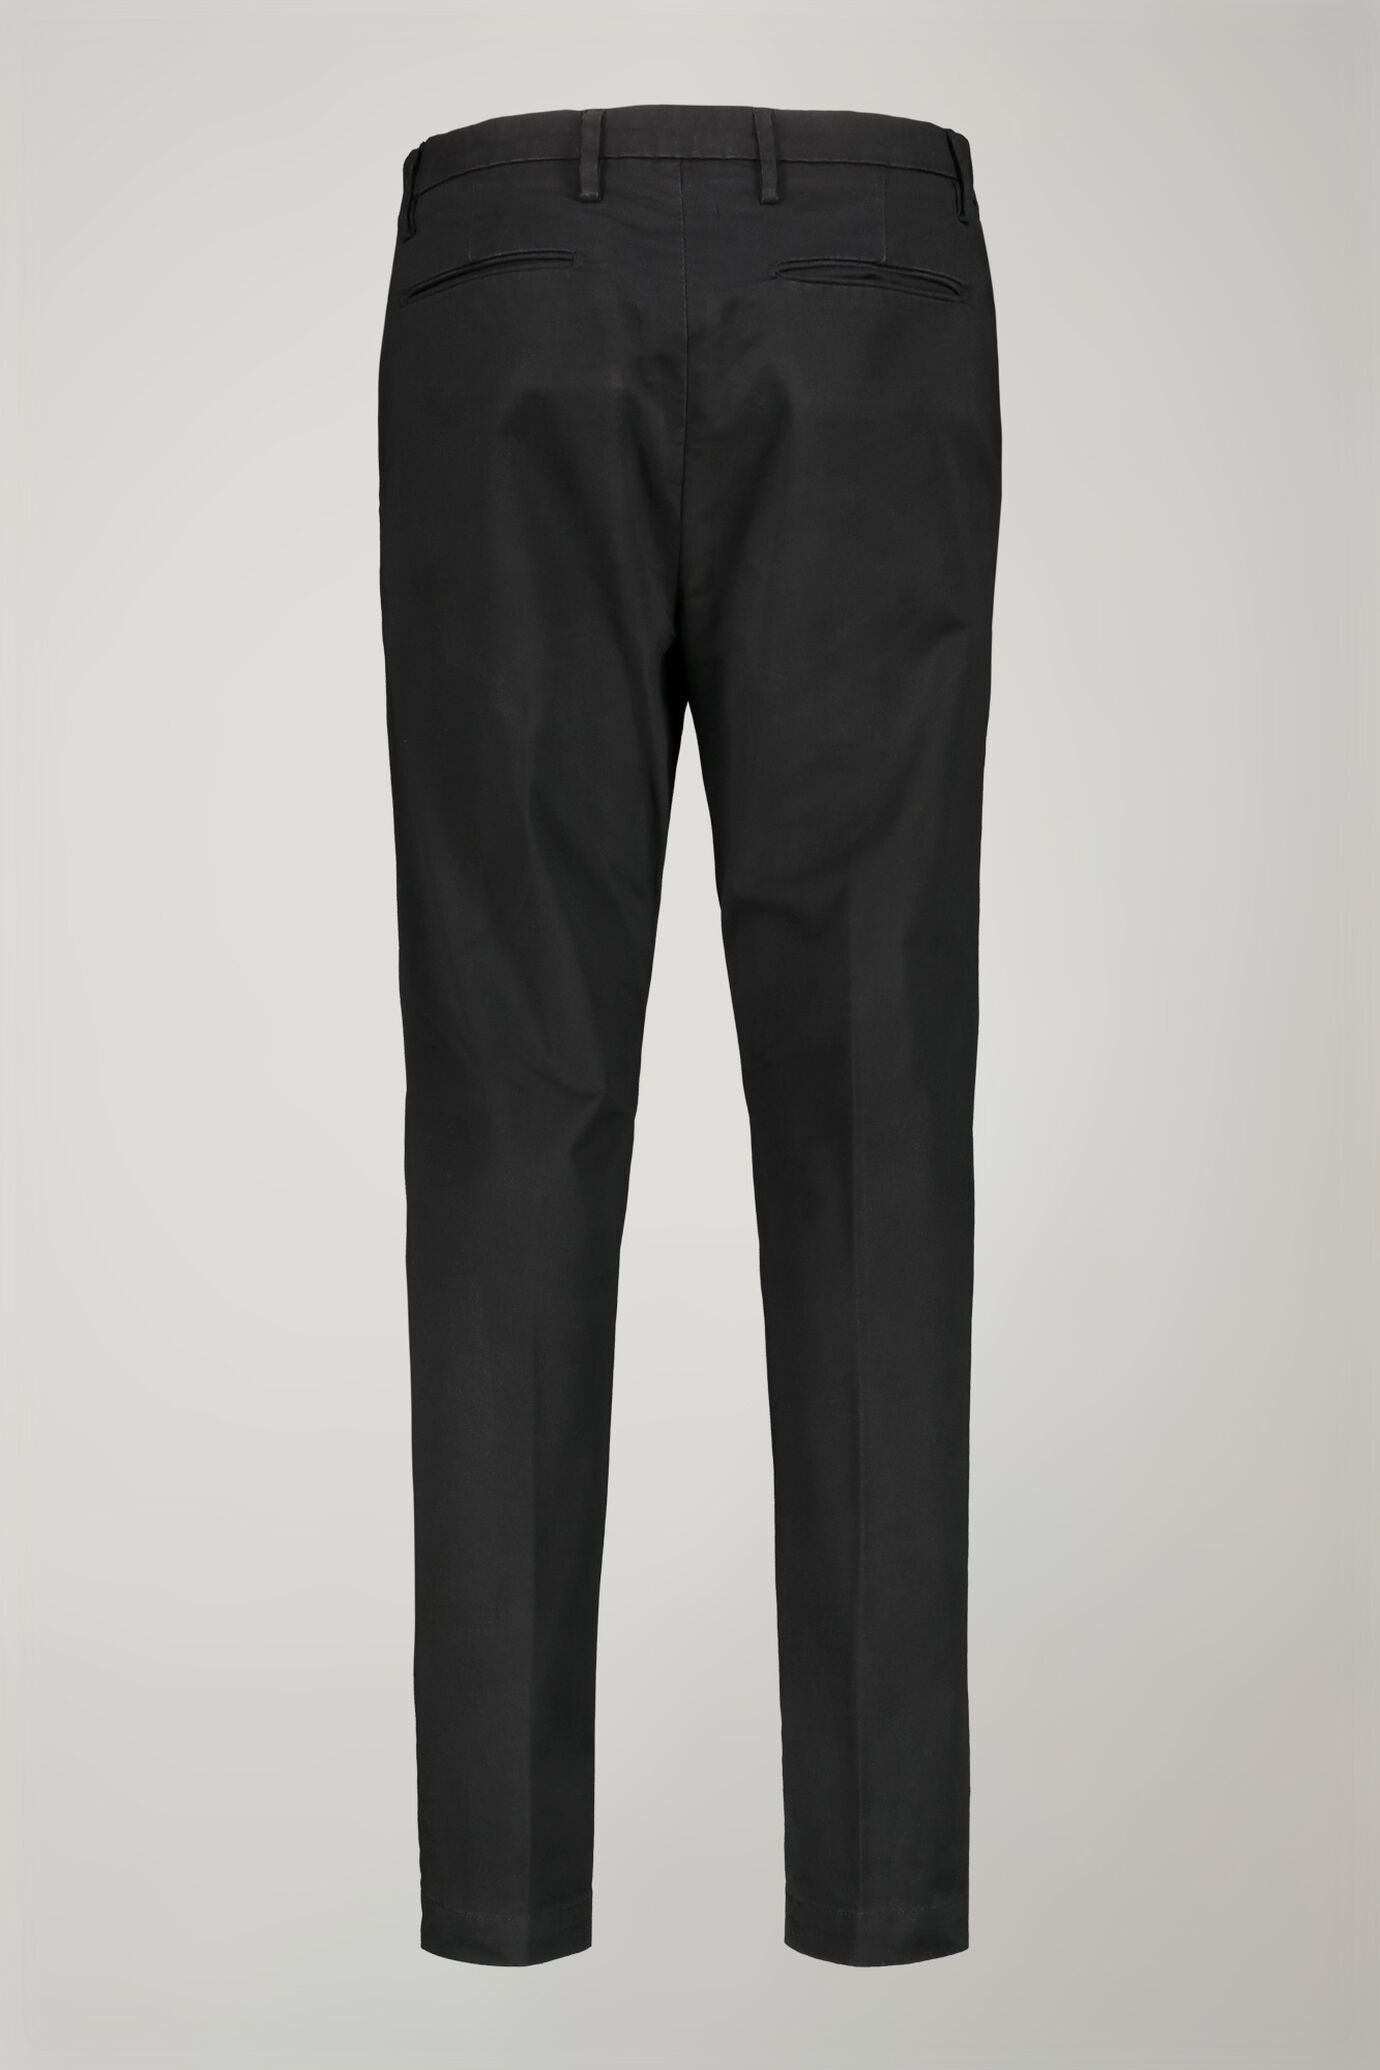 Men's chino trousers classic twill construction perfect fit image number 5